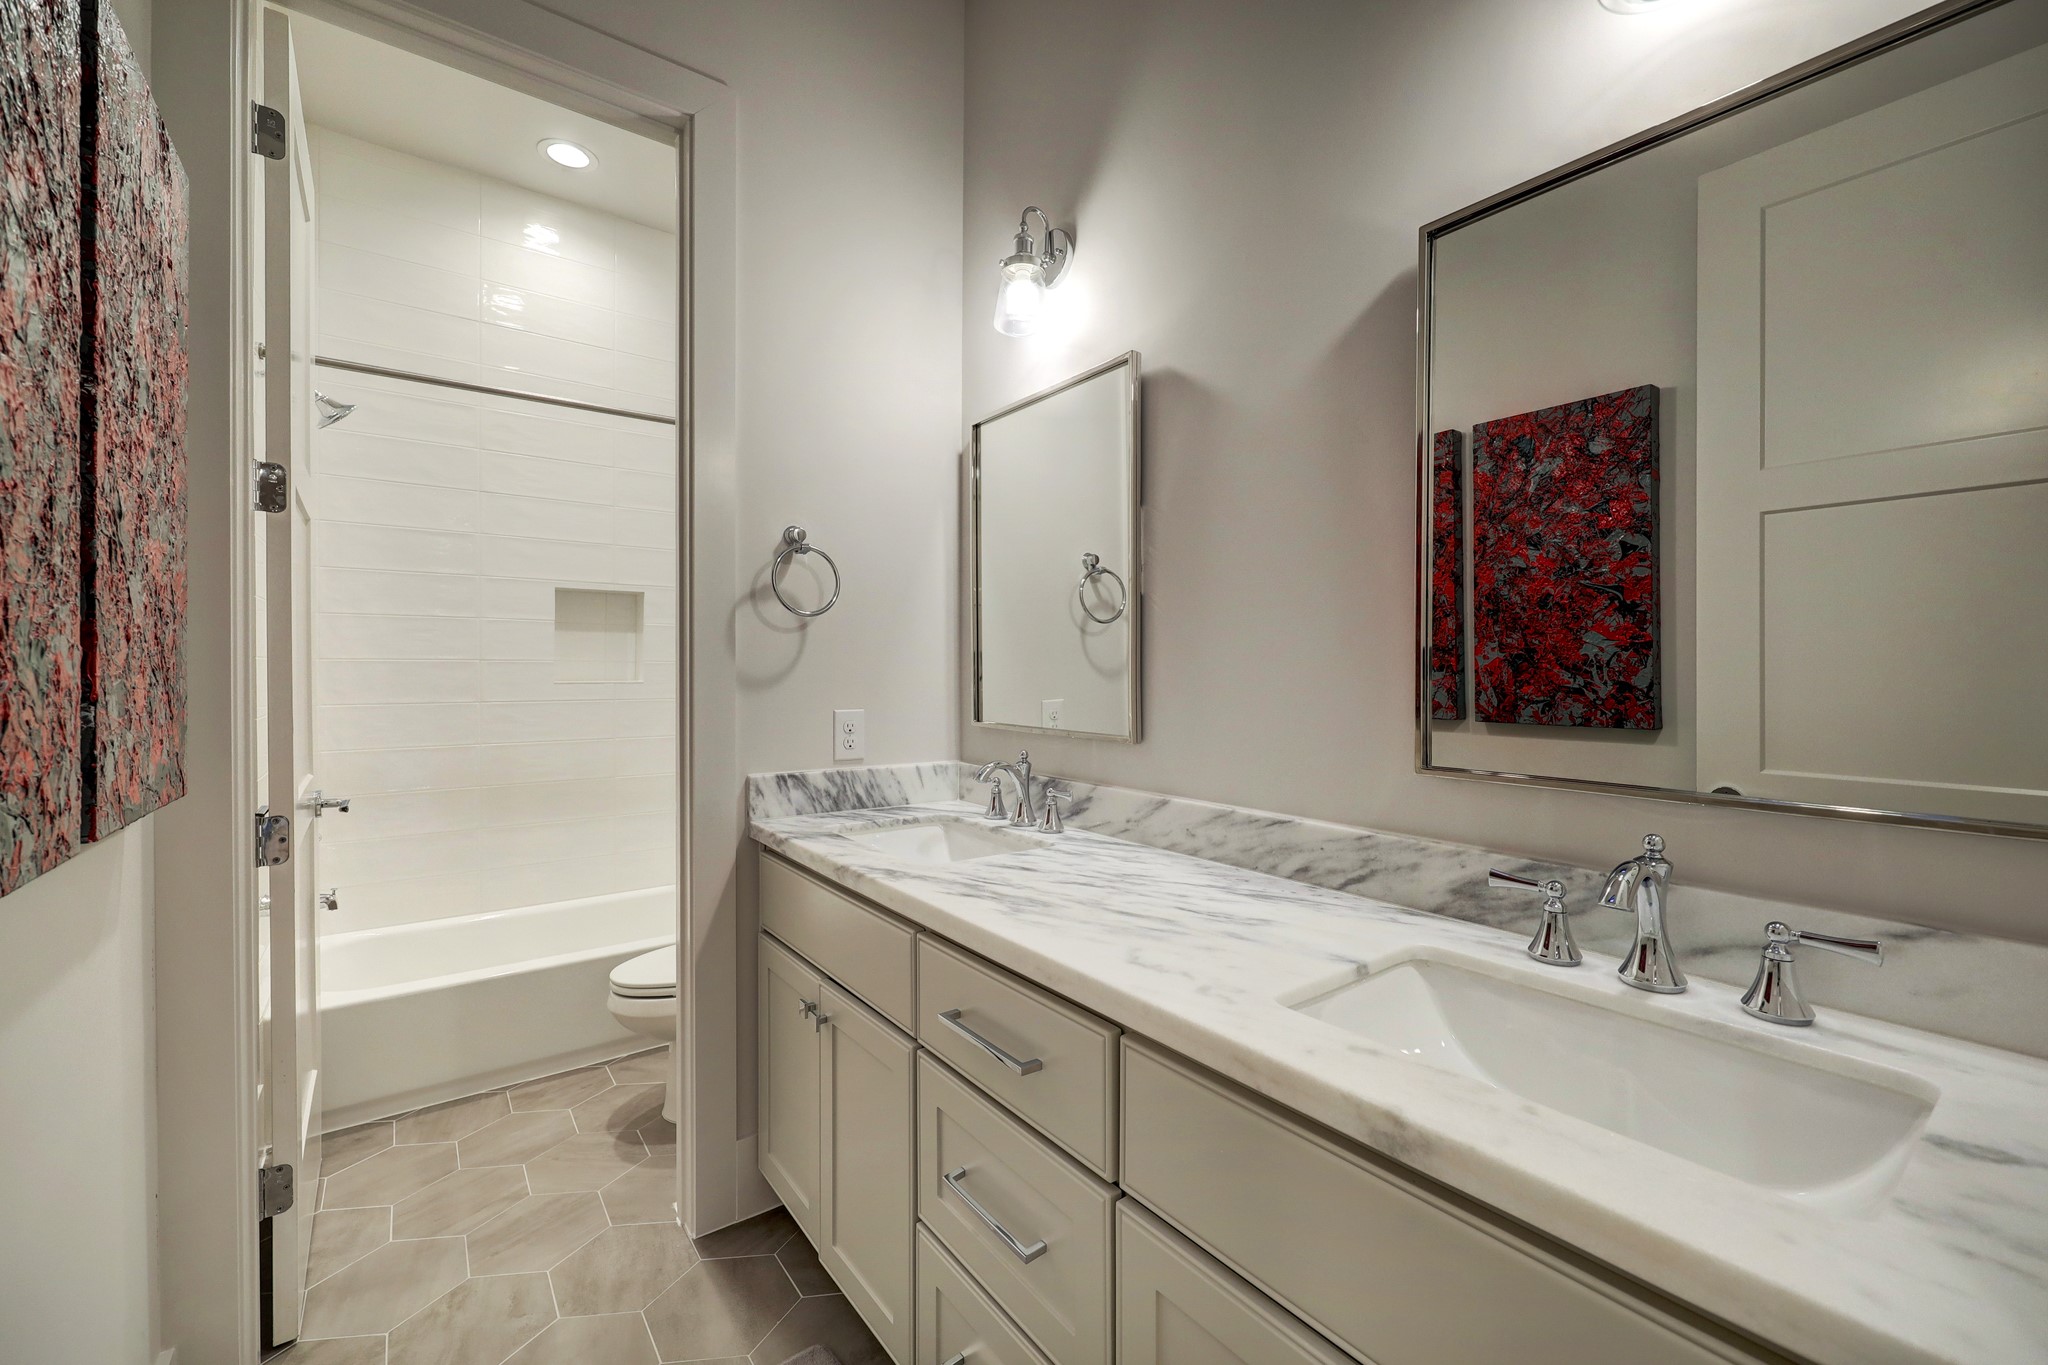 Two secondary bedrooms share this well-appointed hall bathroom with a double vanity area and a separate wet room tub/shower and commode.